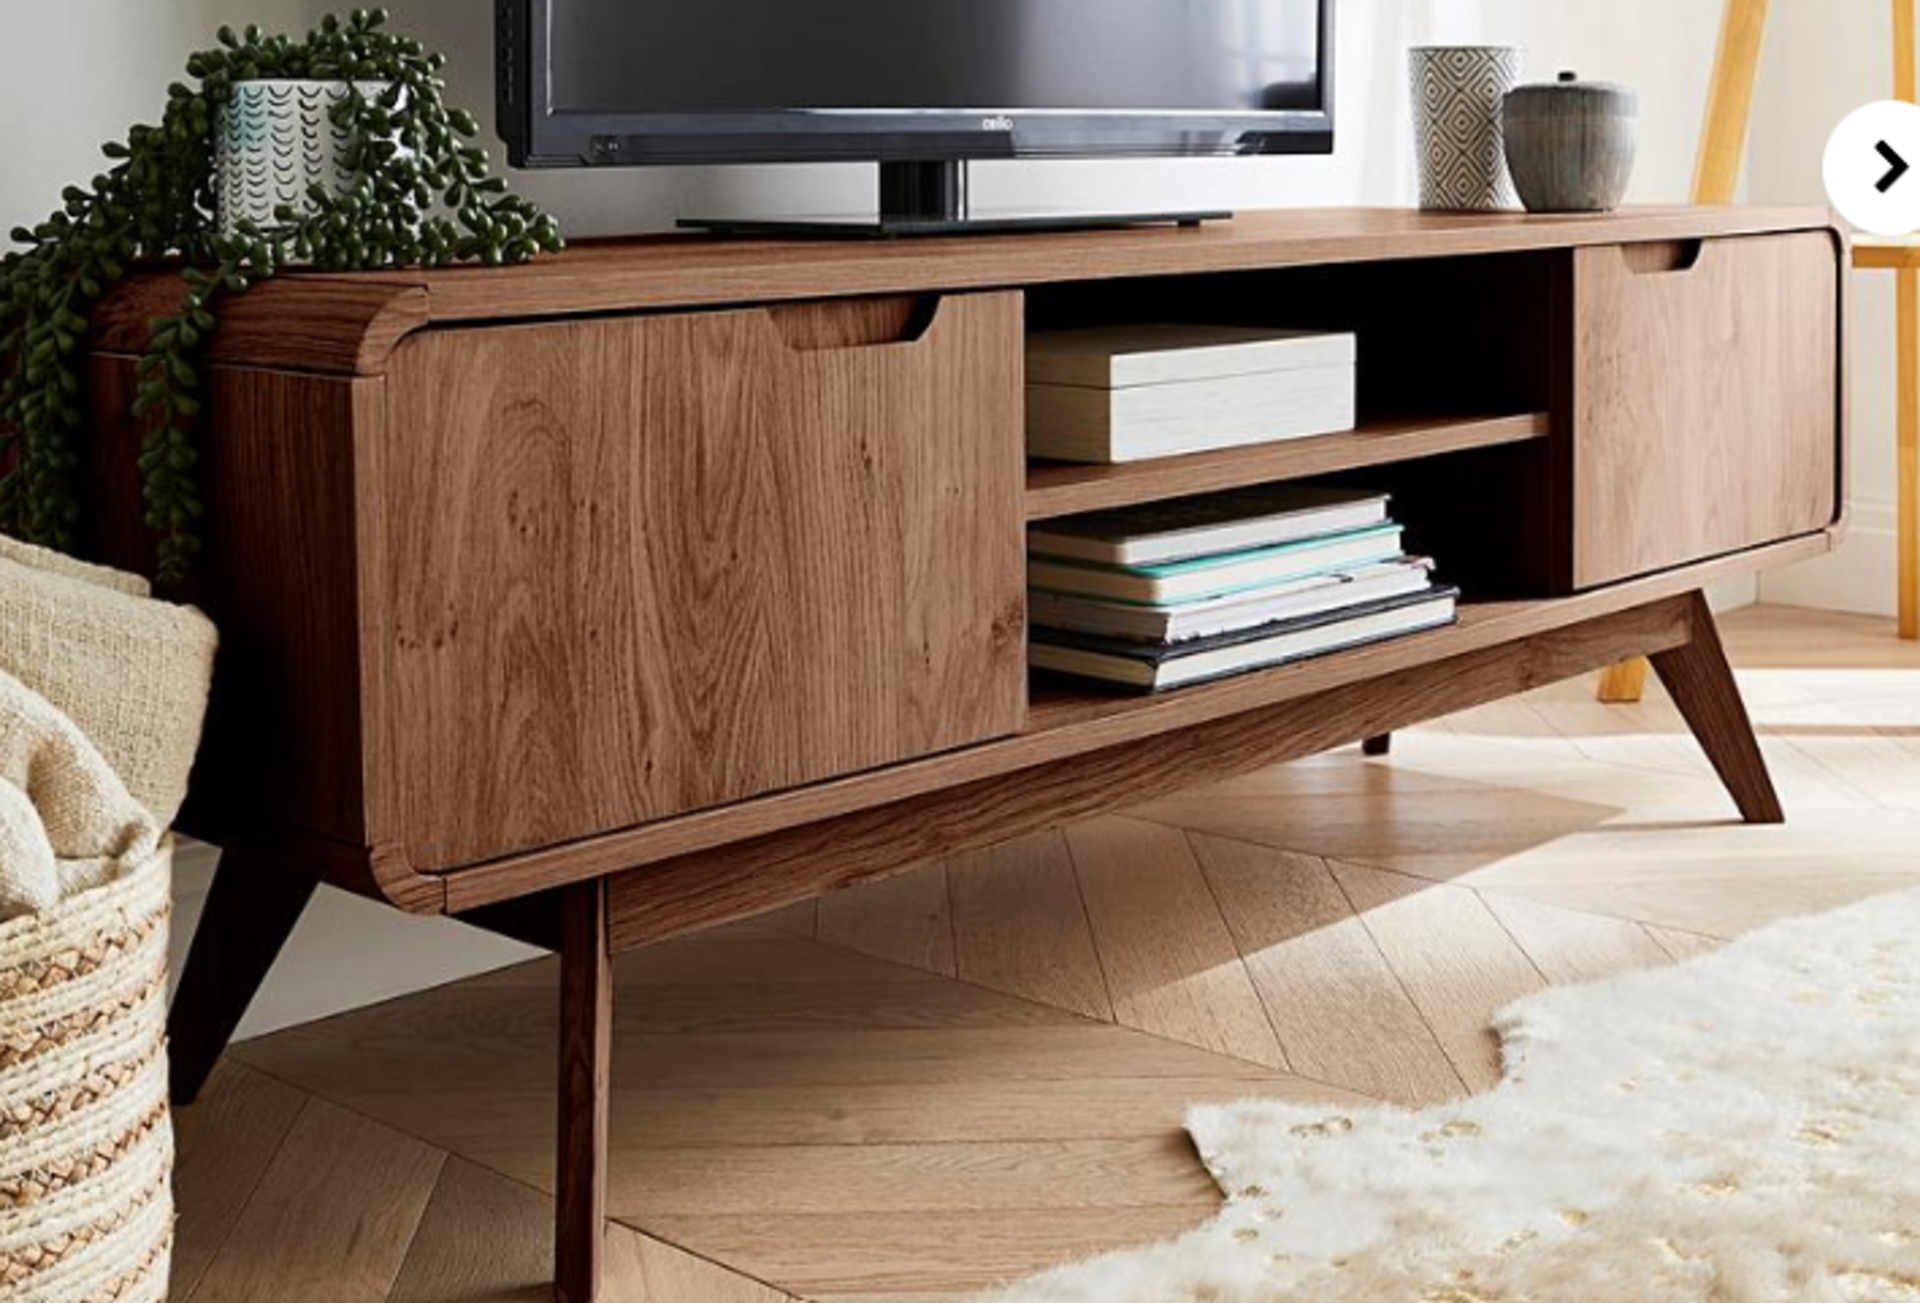 Gray & Osbourn No.157 Oslo TV Unit. - ER20. RRP £209.00. With its beautifully curved retro edges and